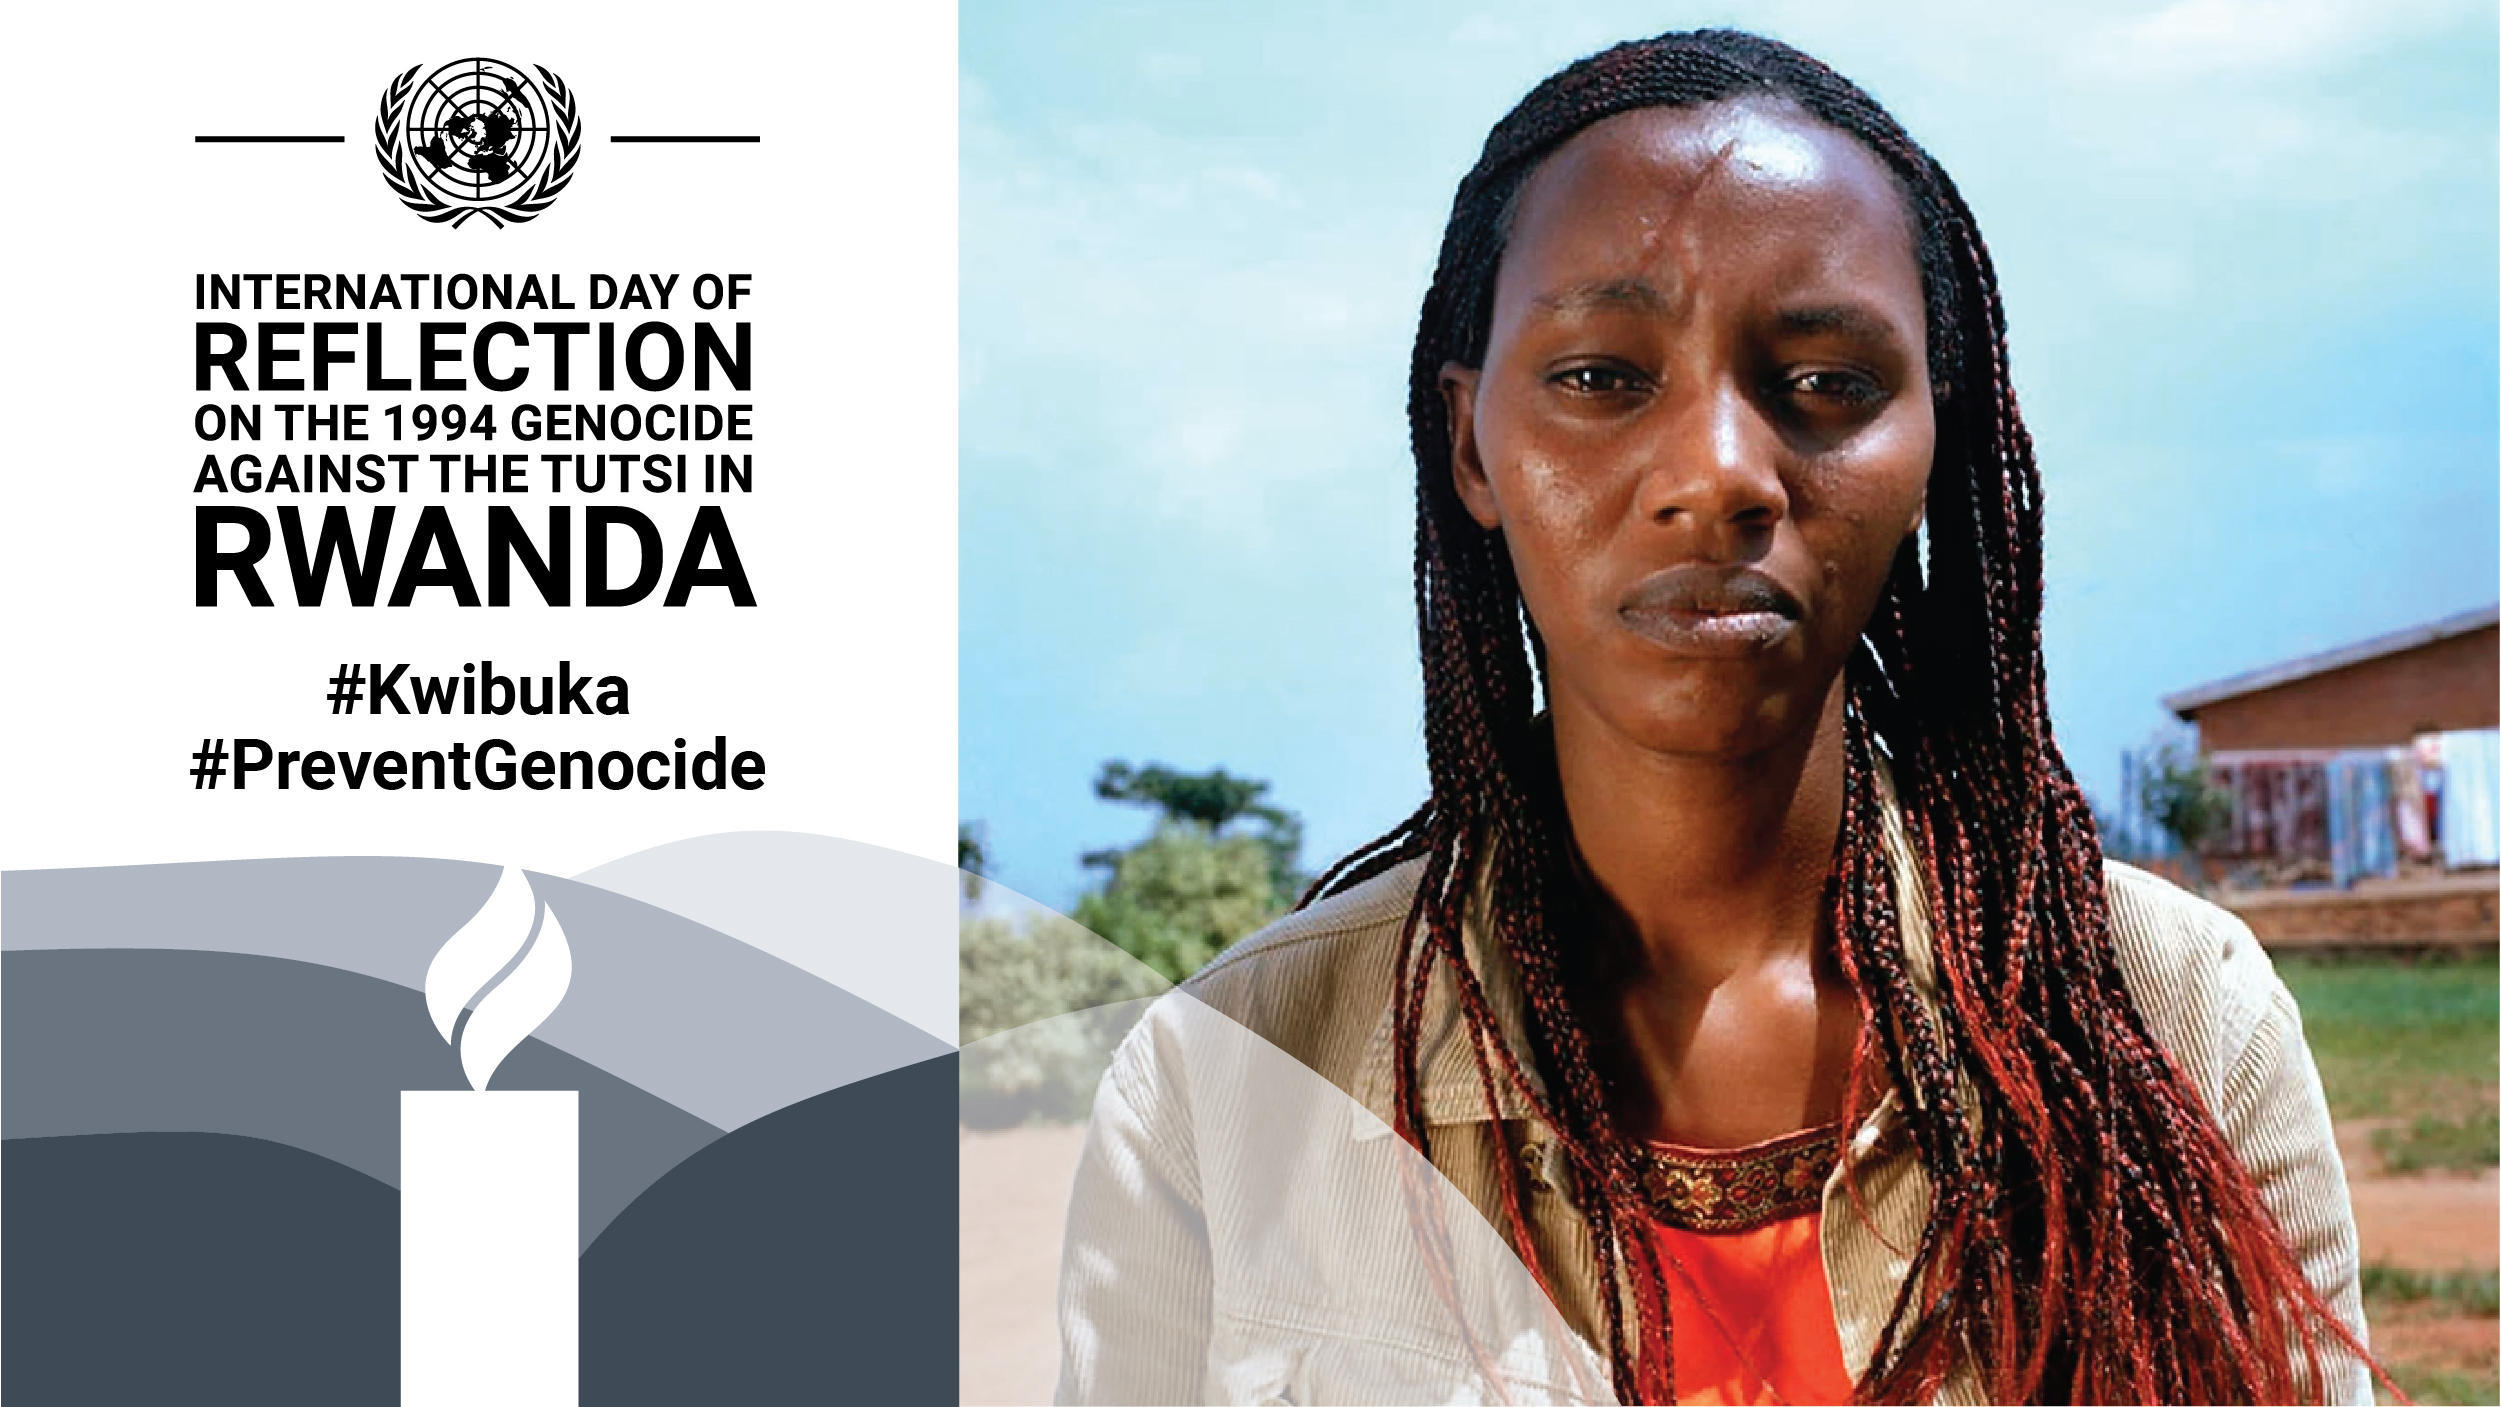 International Day of Reflection on the 1994 Genocide in Rwanda